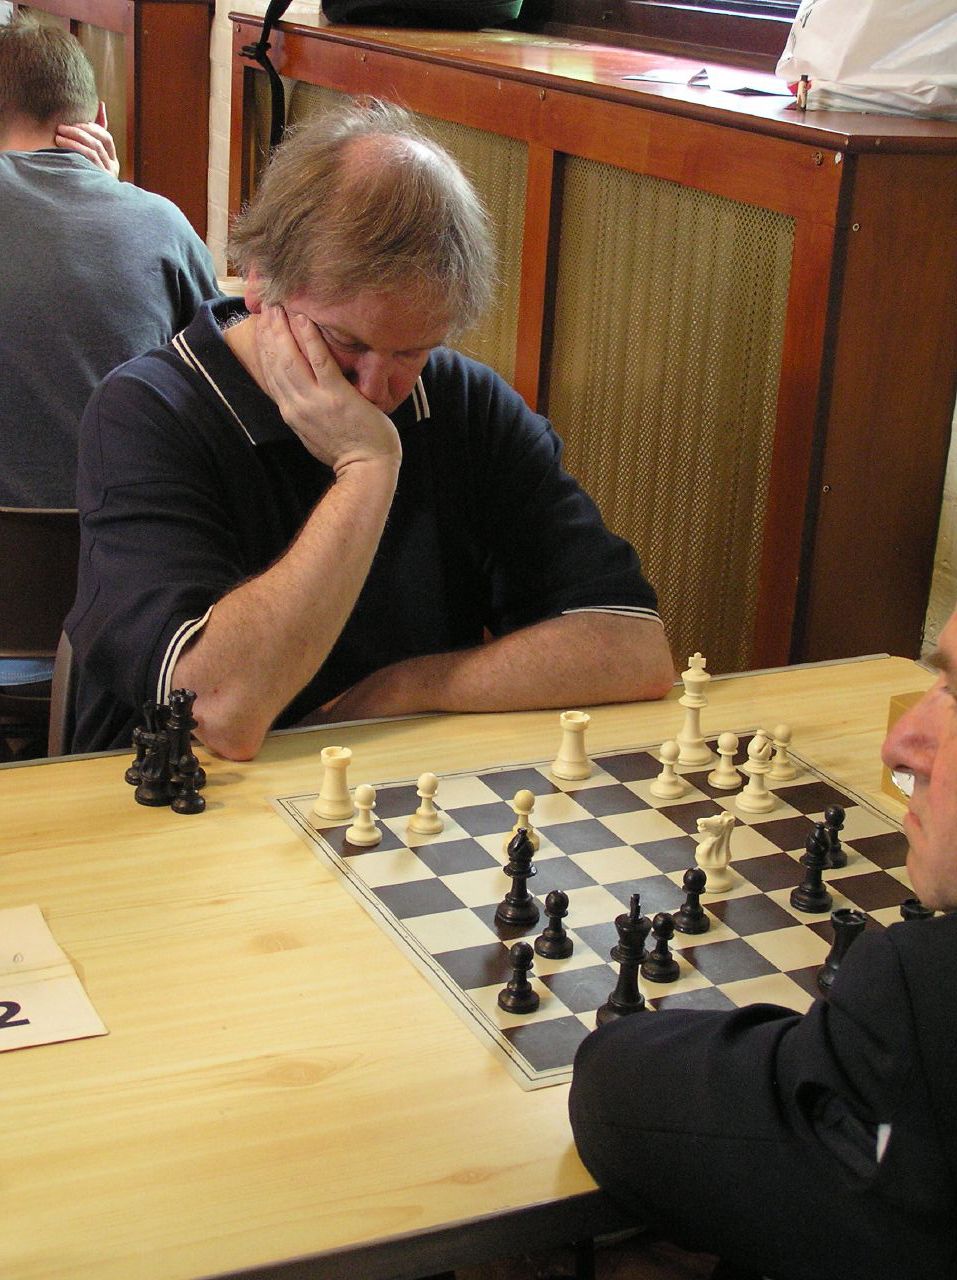 a man sitting at a table with chess